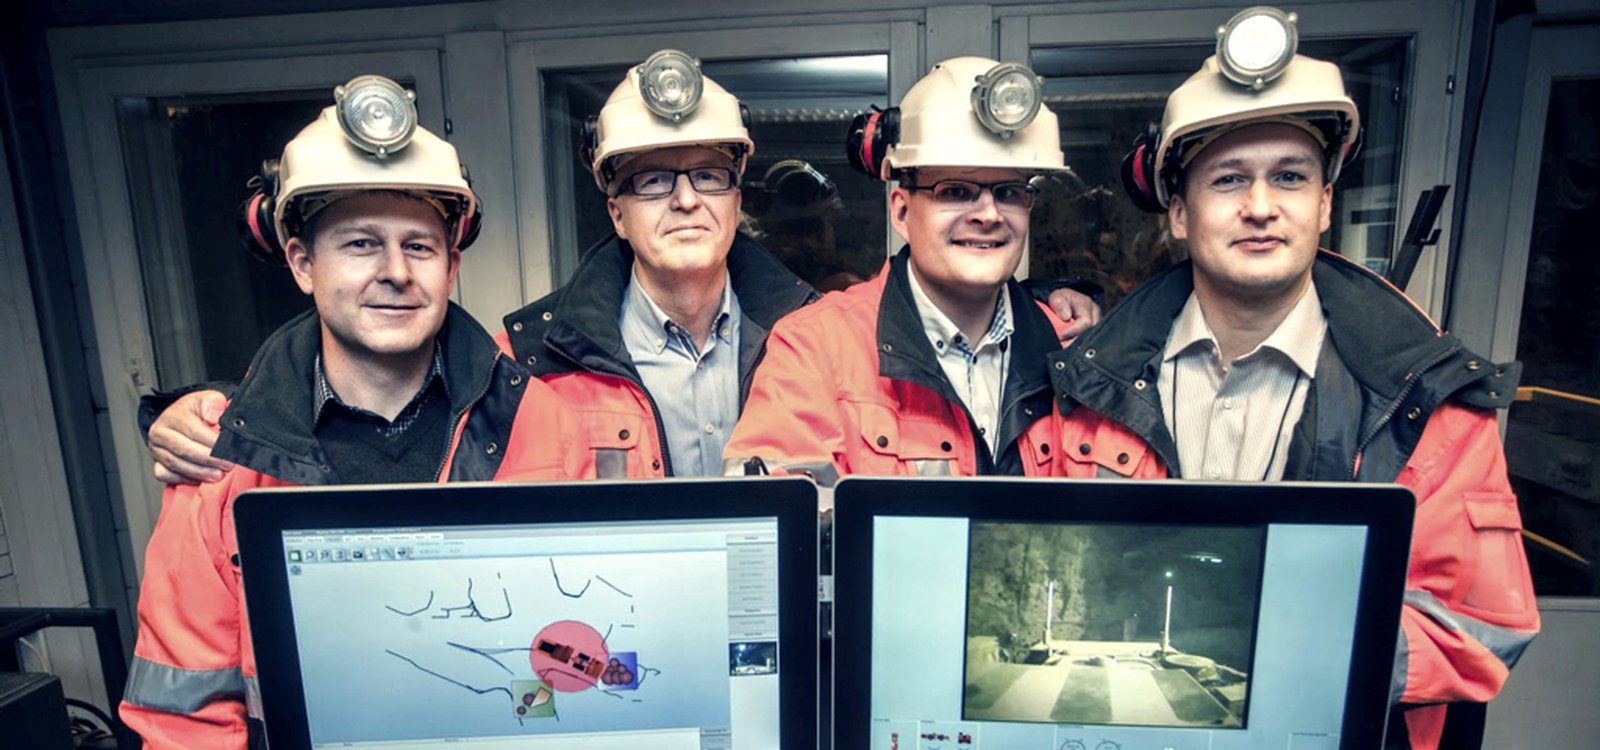 <p>Hard work and dedication earned inductions to the IM Technology Hall of Fame for these four Sandvik colleagues.</p>
